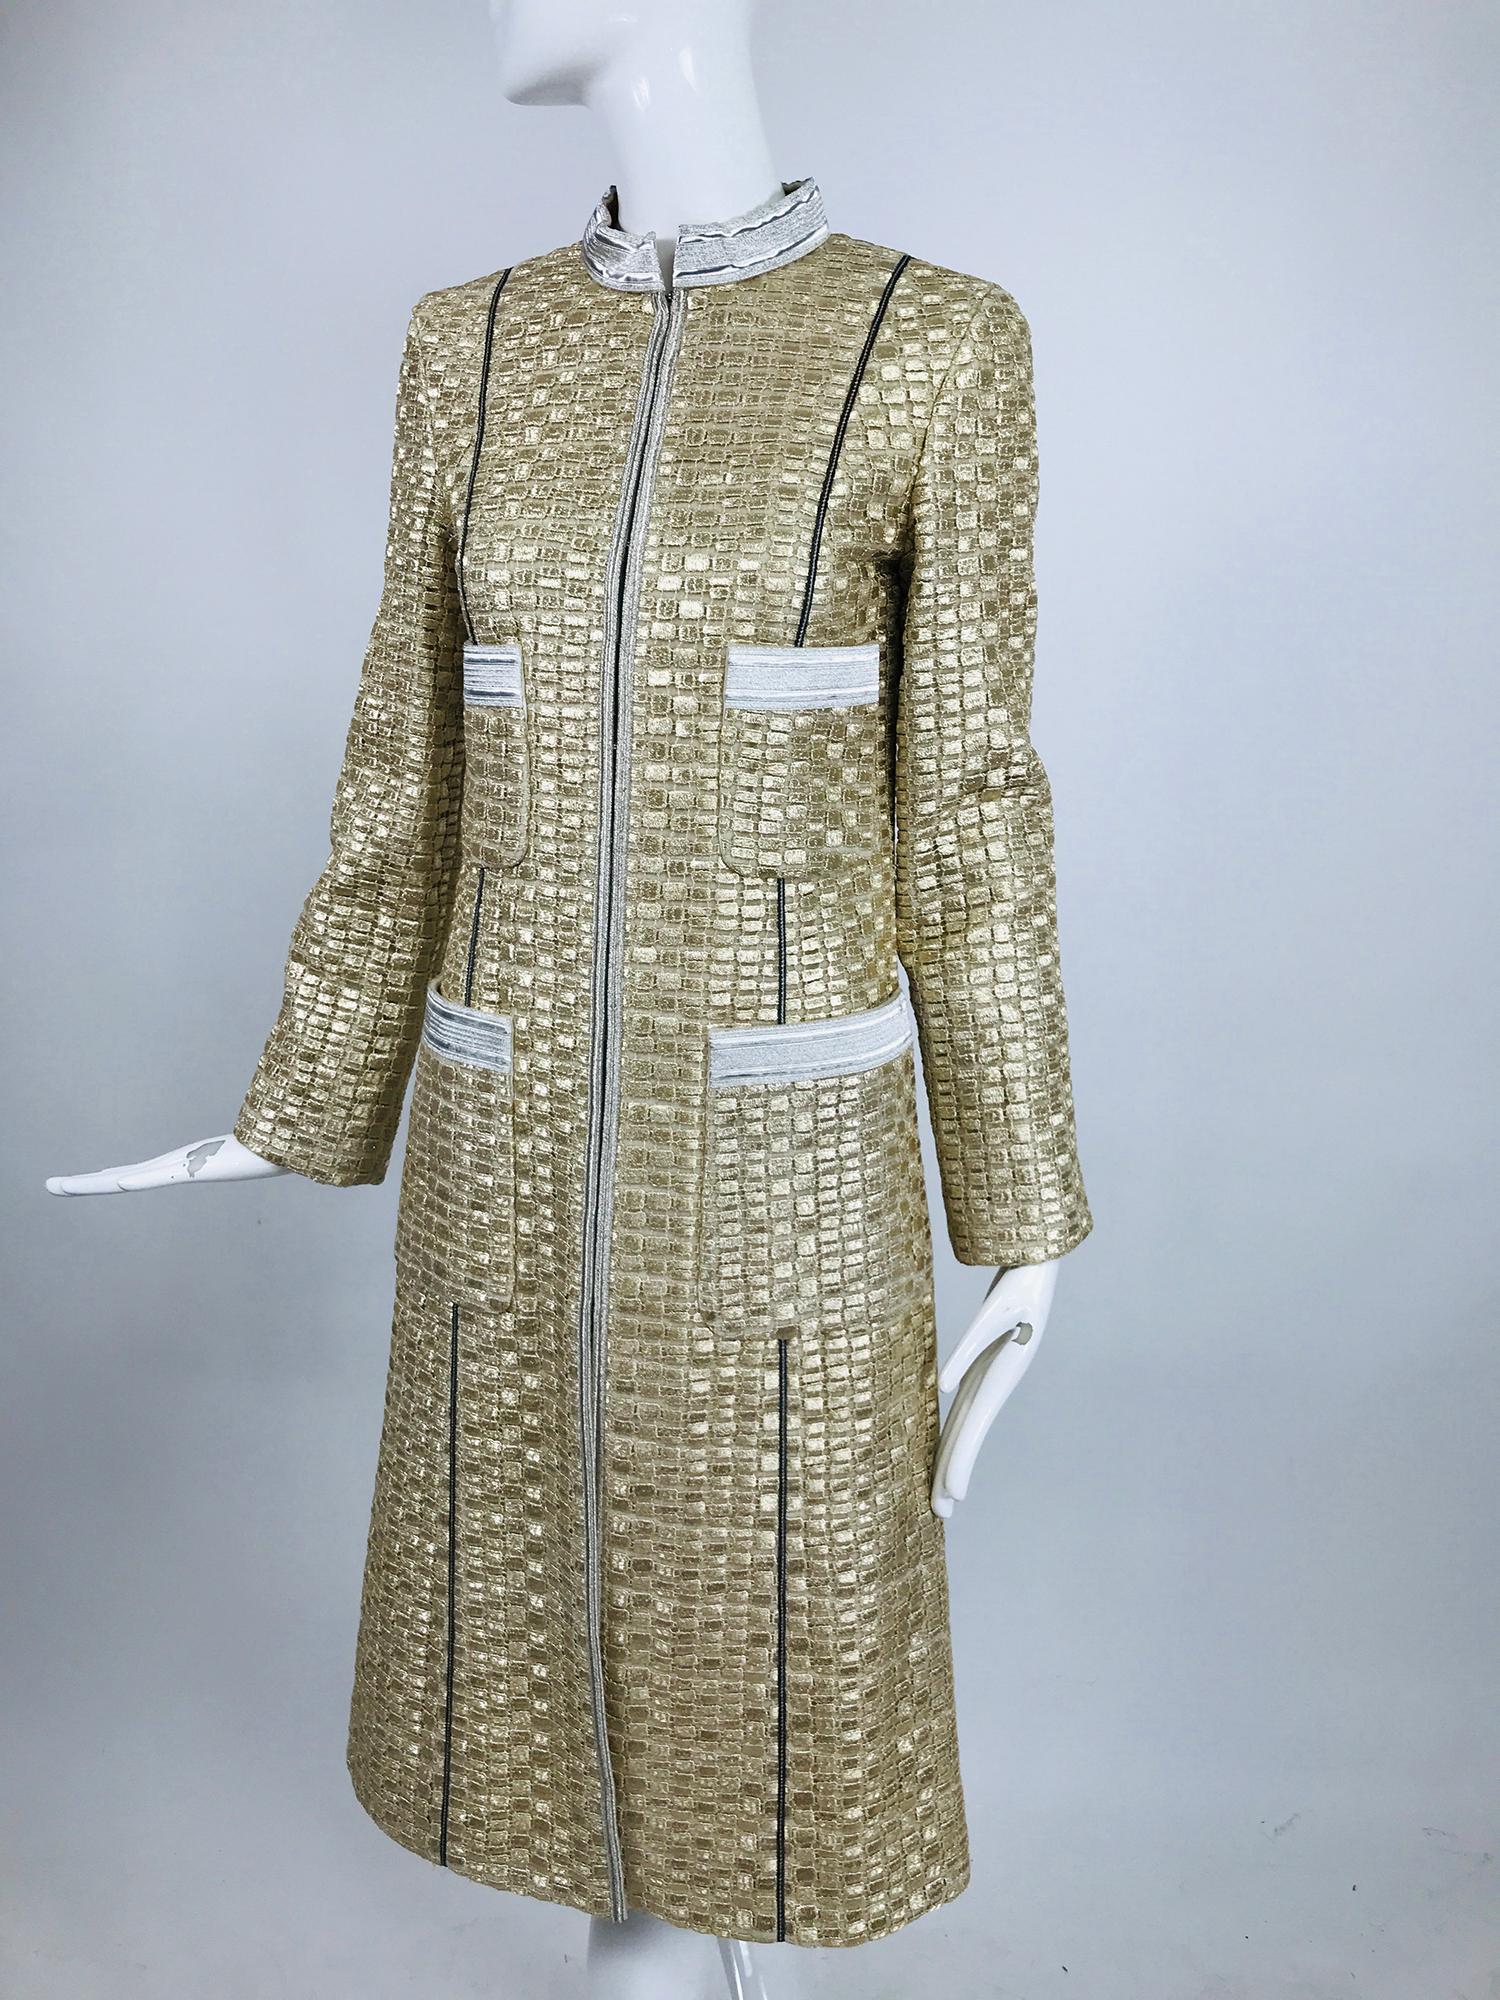 Marc Jacobs gold and silver metallic 4 pocket Chanel style coat. This is a gorgeous coat is perfect anytime, dress it up or dress it down.  Silver band collar the coat closes at the front with hidden silver hooks. The fabric is done in a grid of